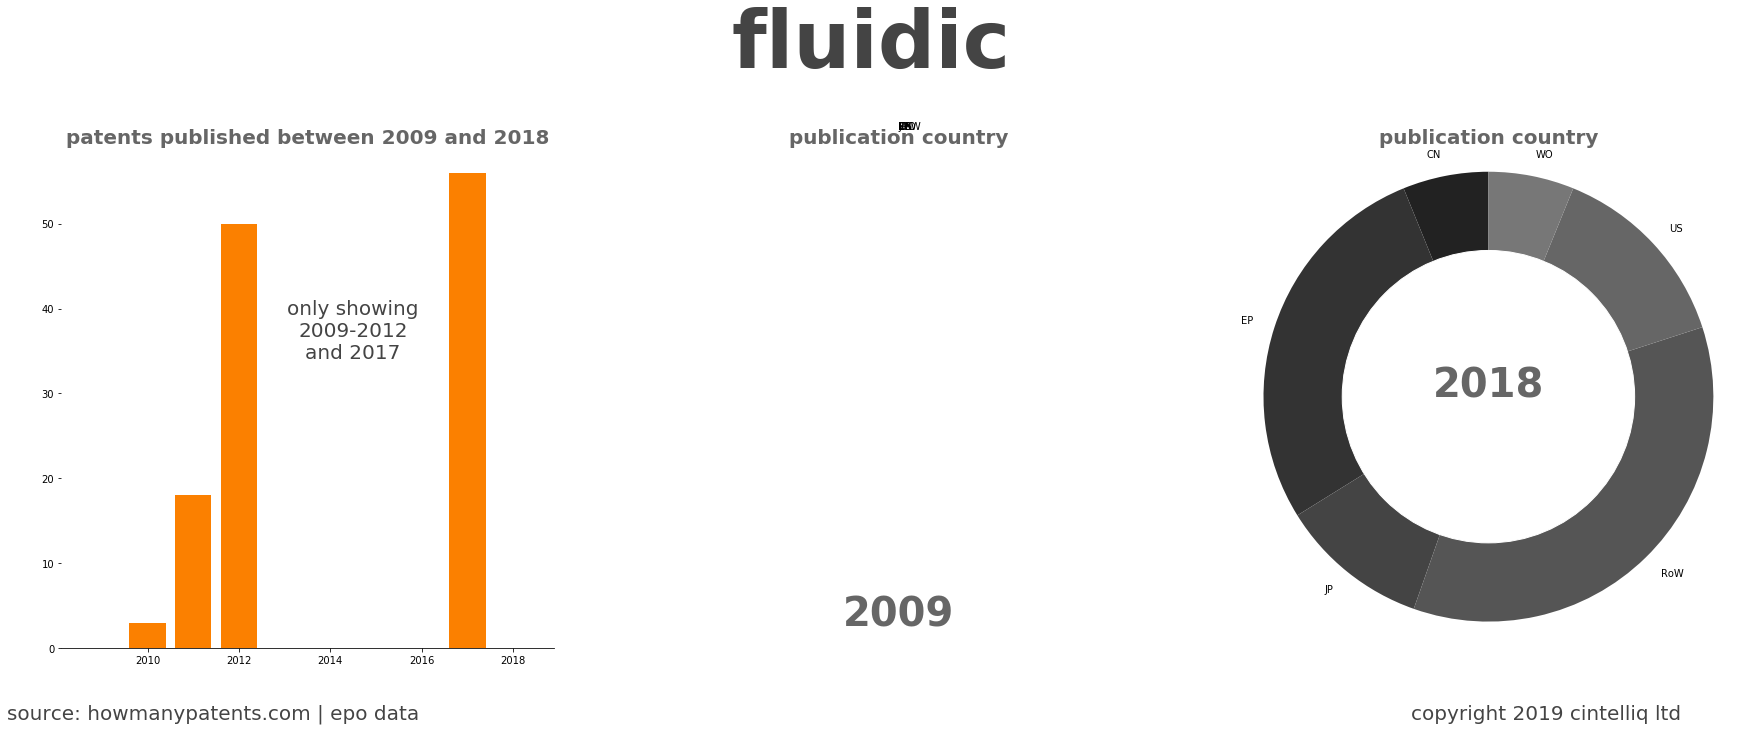 summary of patents for Fluidic